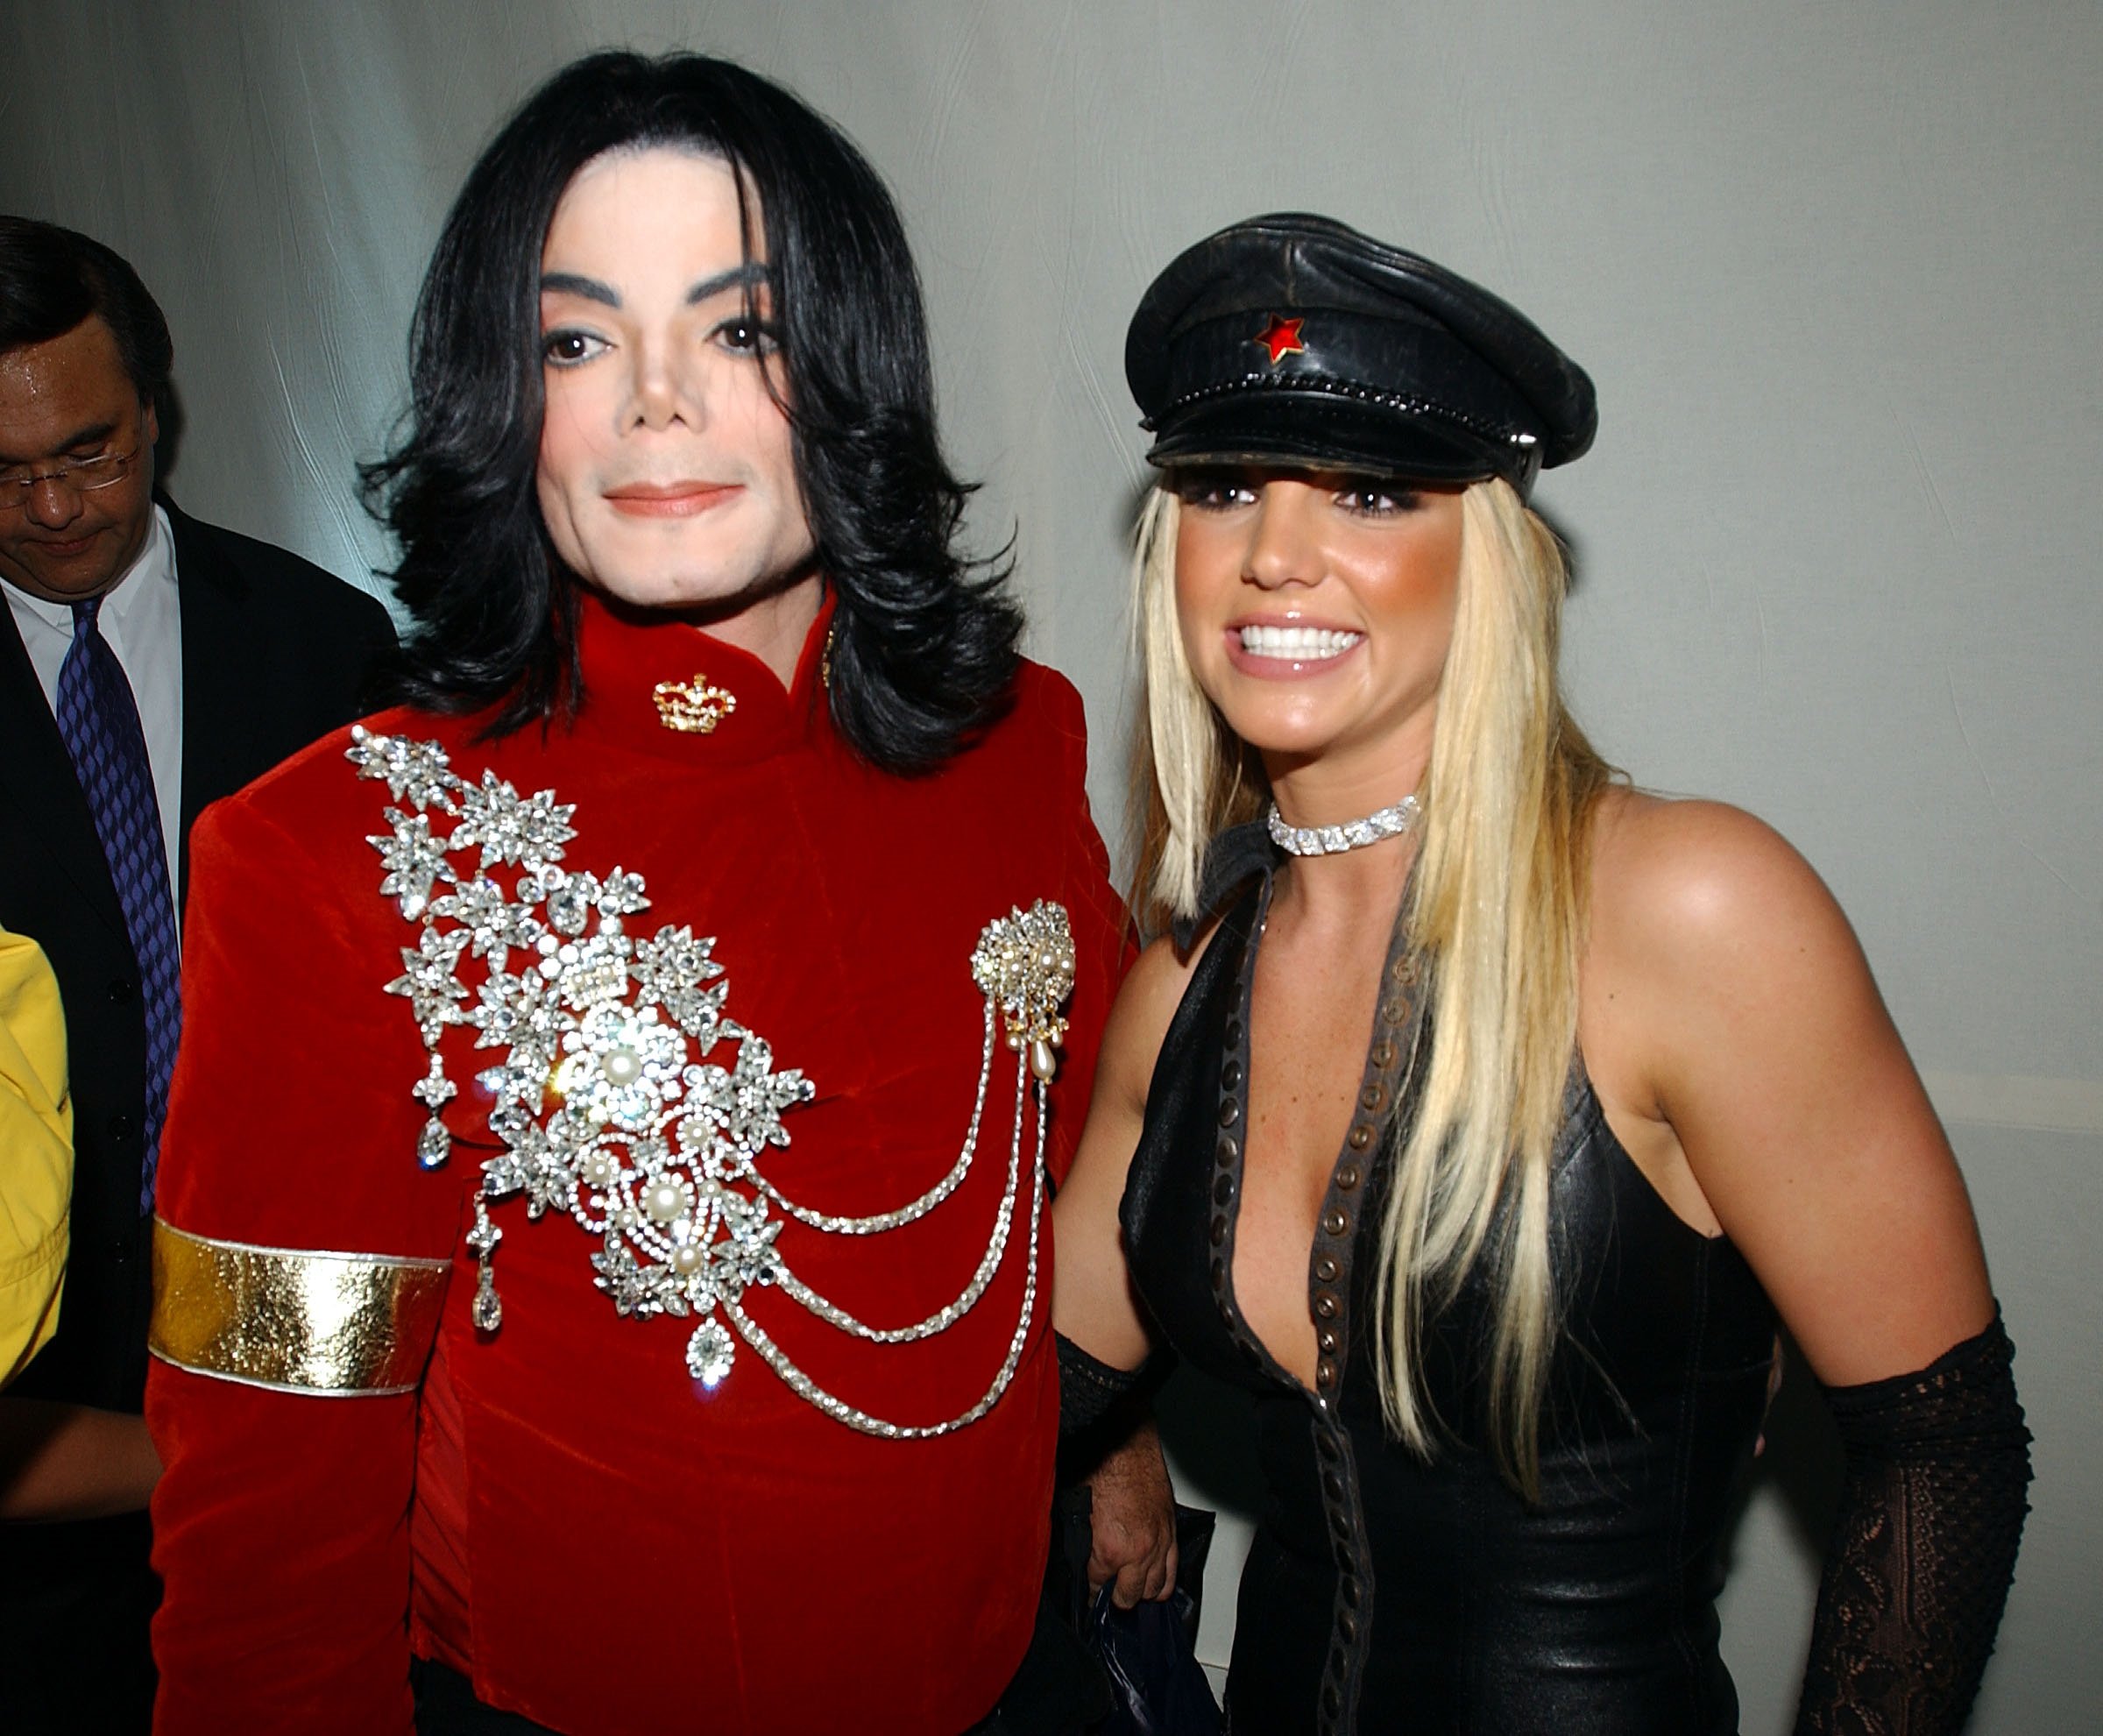 Michael Jackson and Britney Spears at the 2002 MTV Video Music Awards